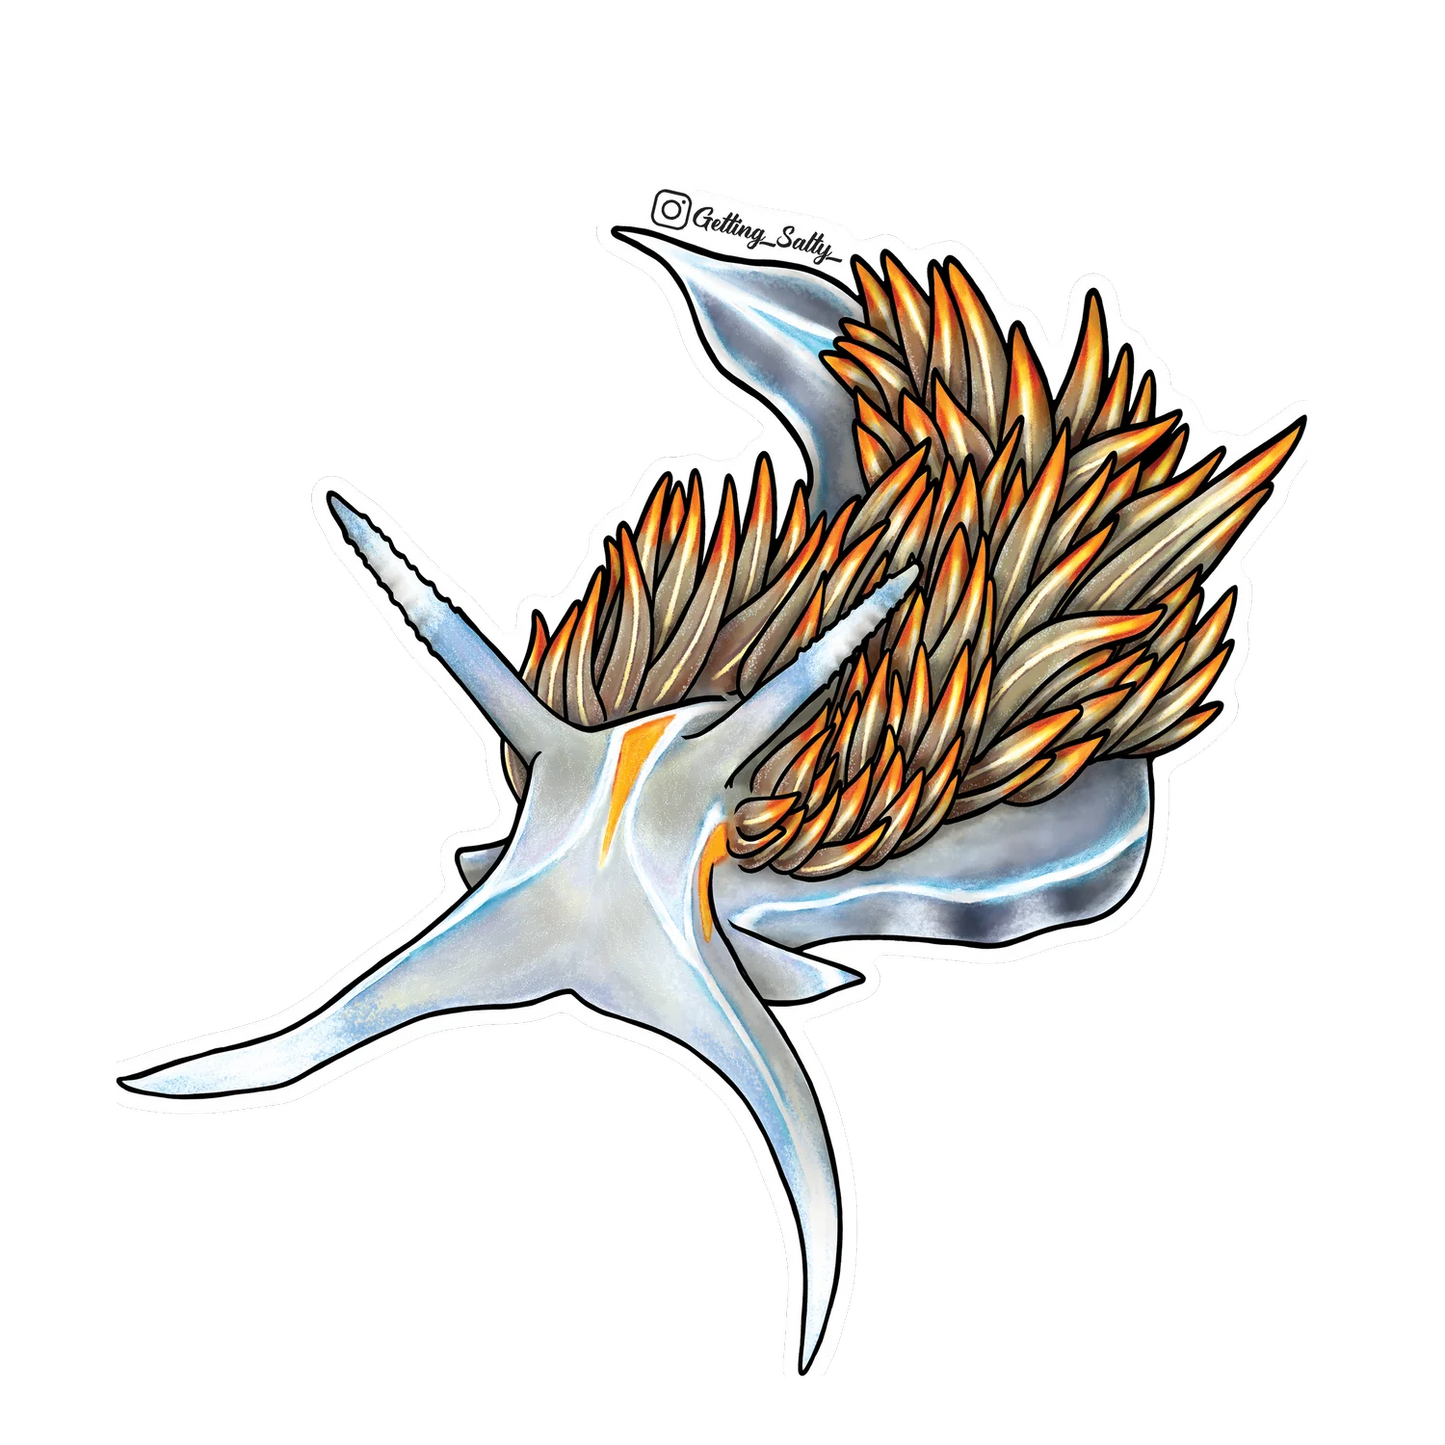 GETTING SALTY OPALESCENT NUDIBRANCH